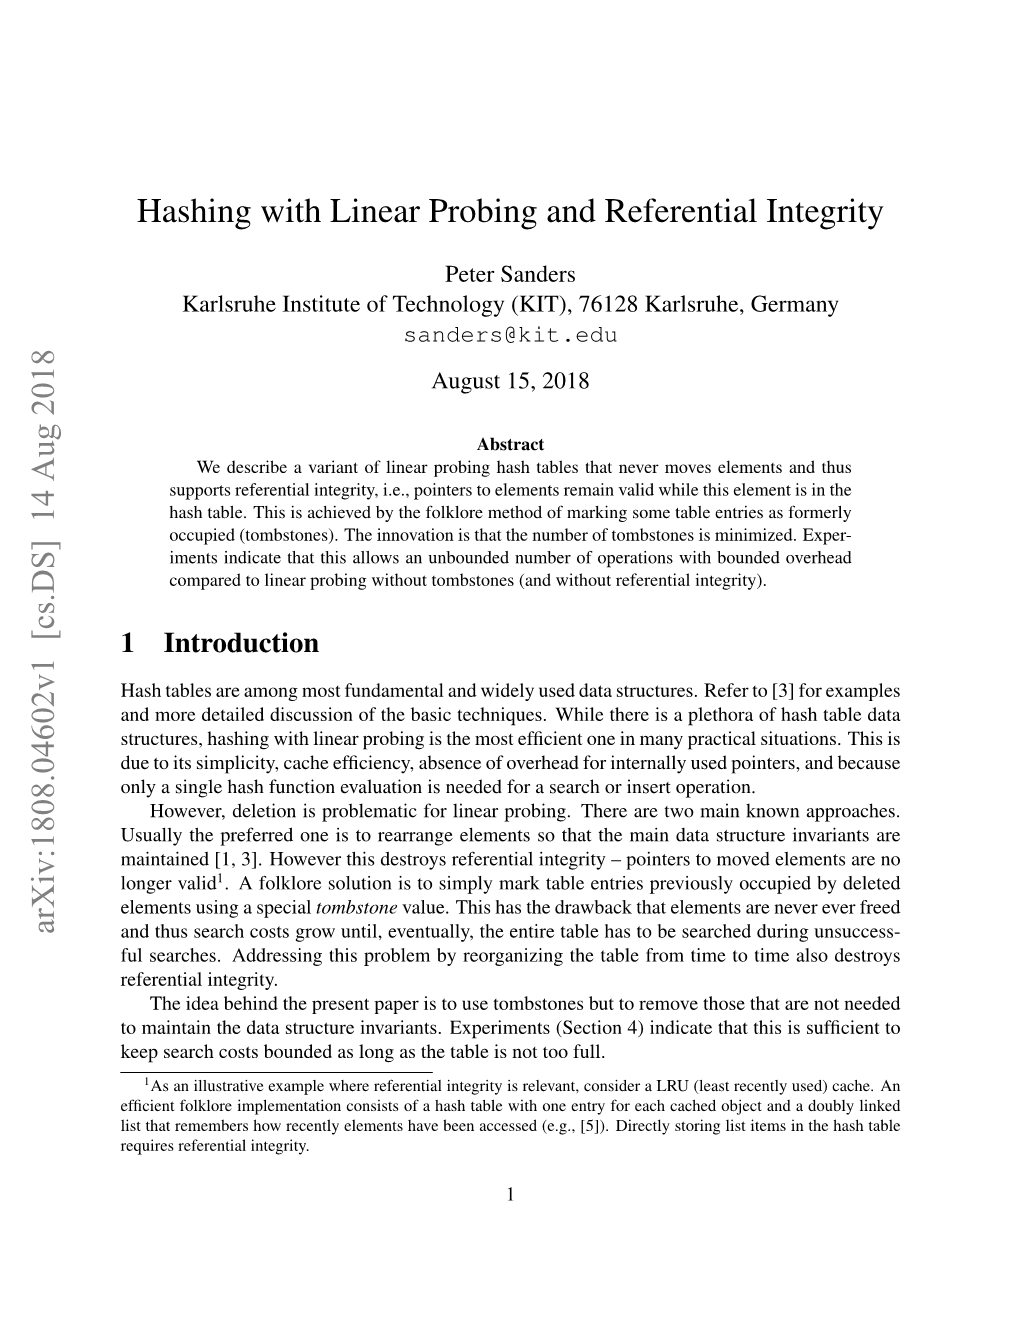 Hashing with Linear Probing and Referential Integrity